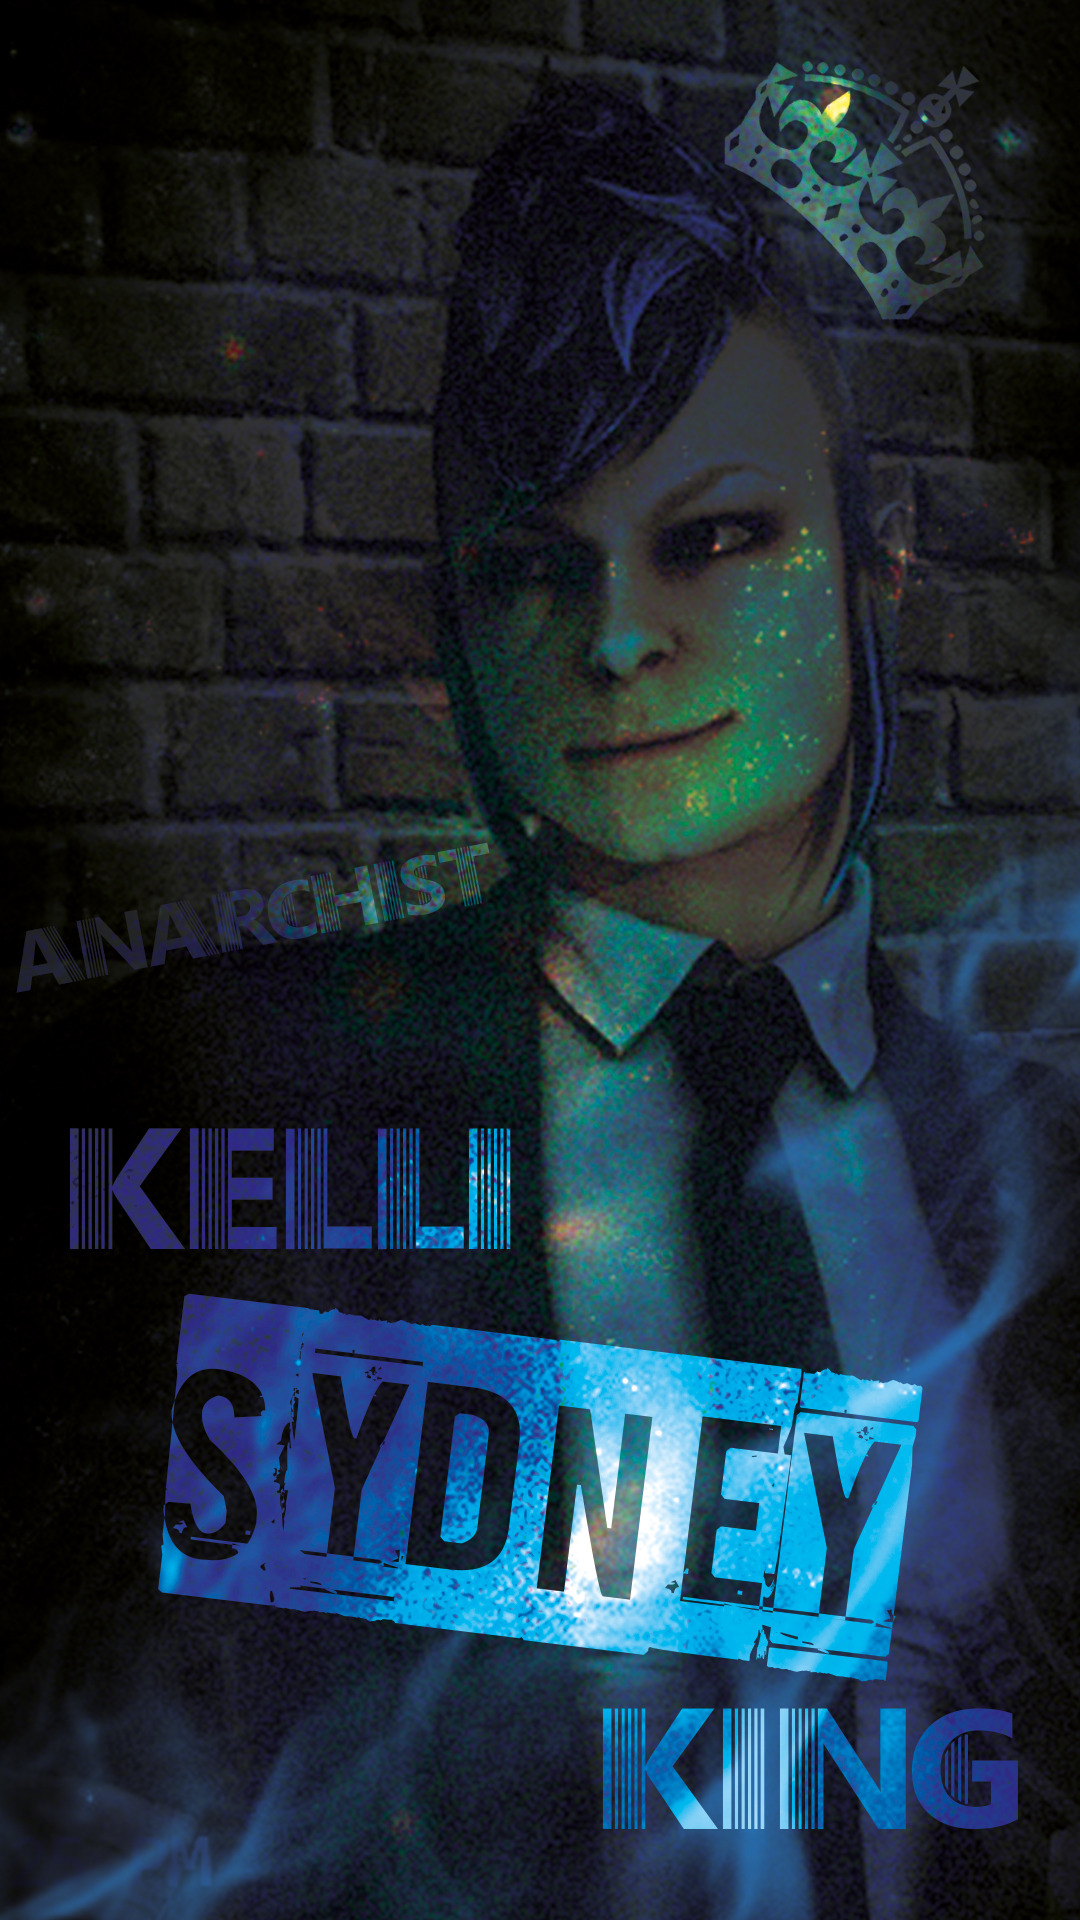 Sydney from payday 2 фото 21